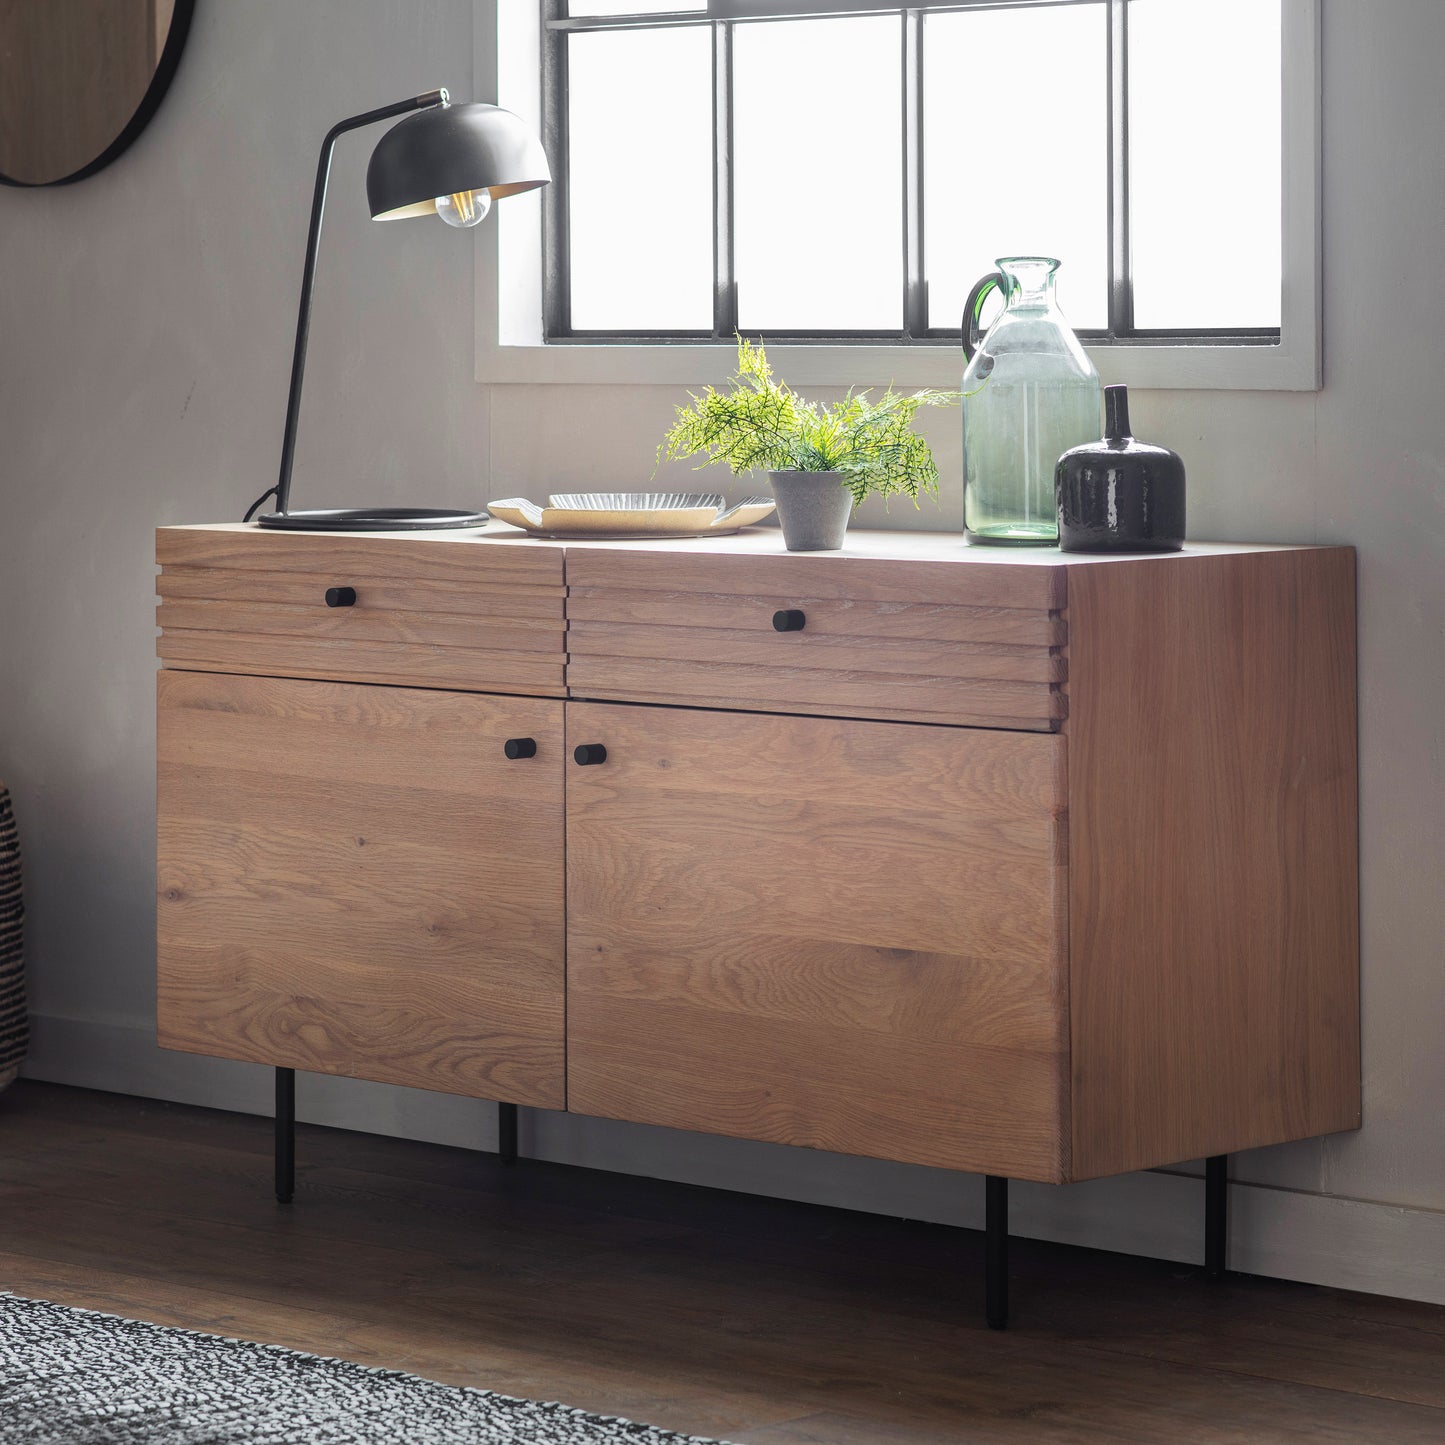 A Tortington 2 Drawer 2 Door Sideboard 1310x450x720mm from Kikiathome.co.uk, the perfect addition to your interior decor.